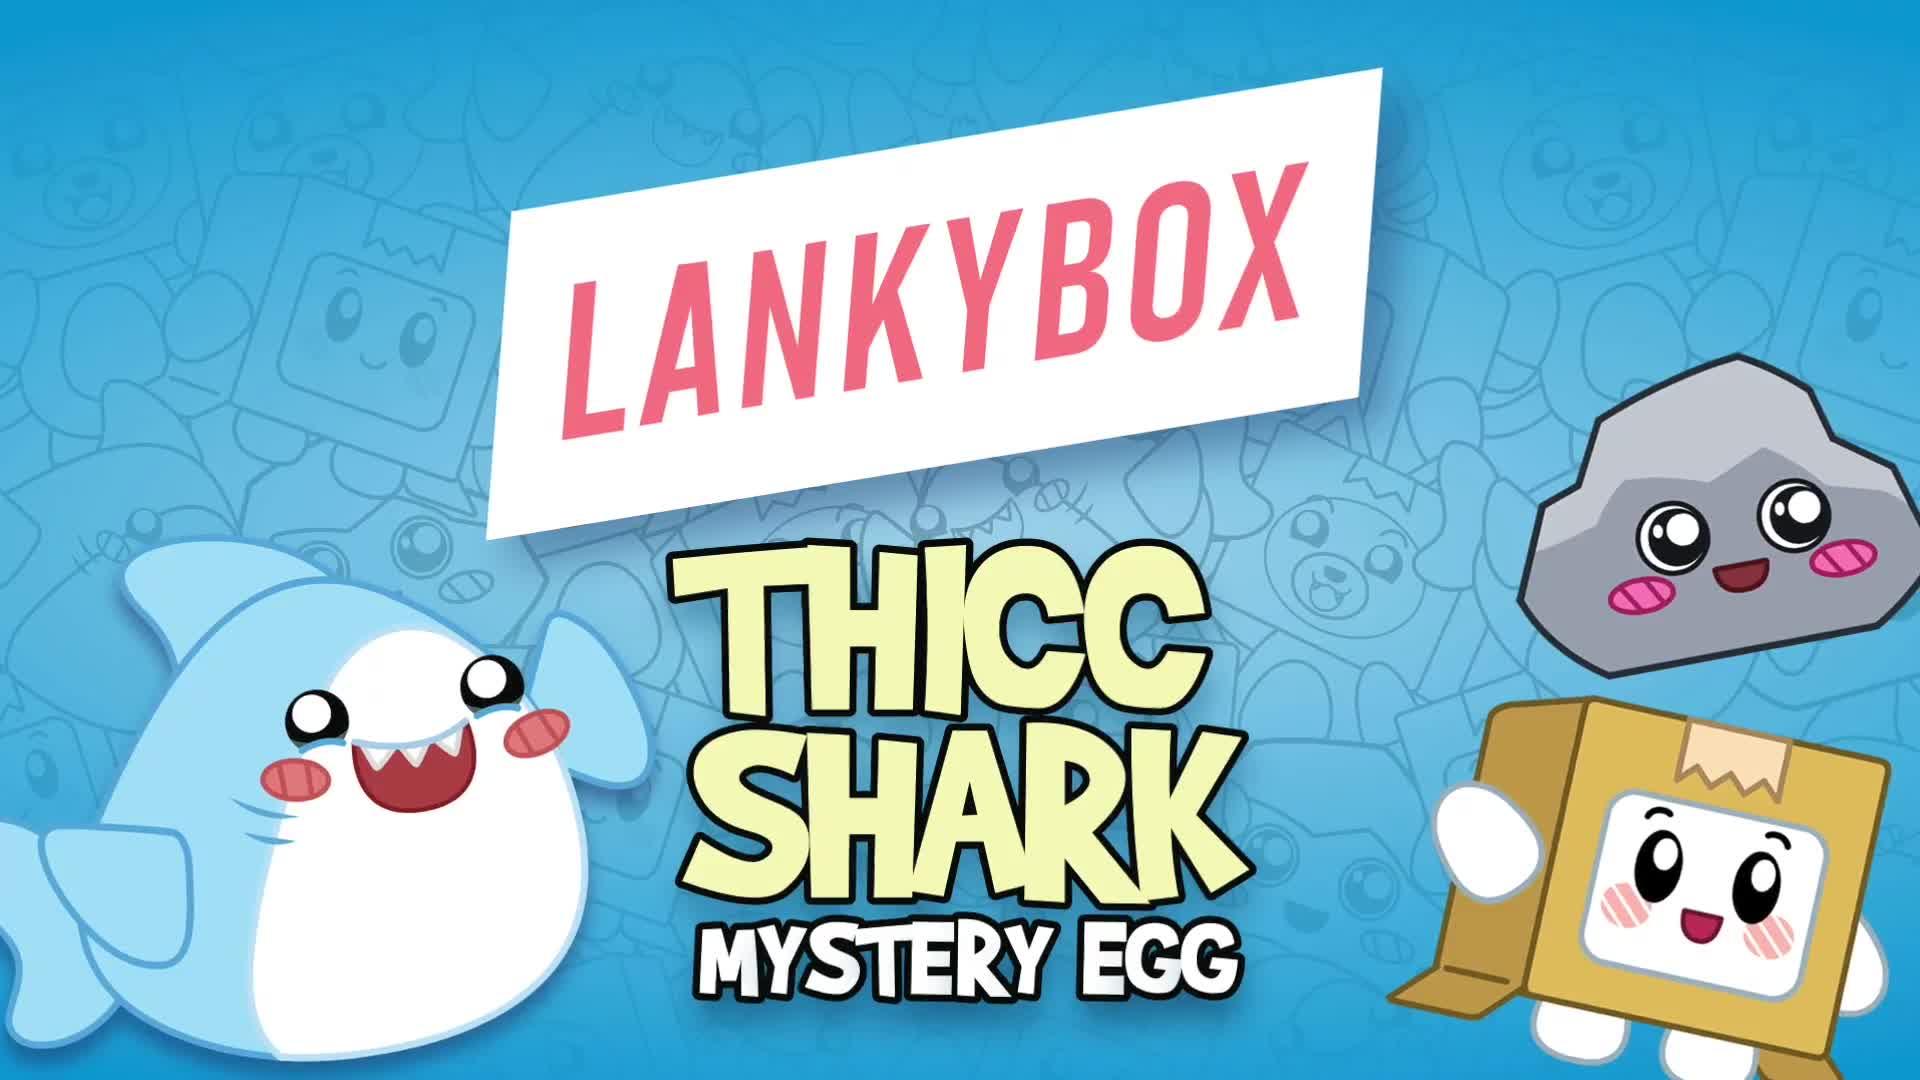 LankyBox - Use Star Code 'LankyBox' to be entered in